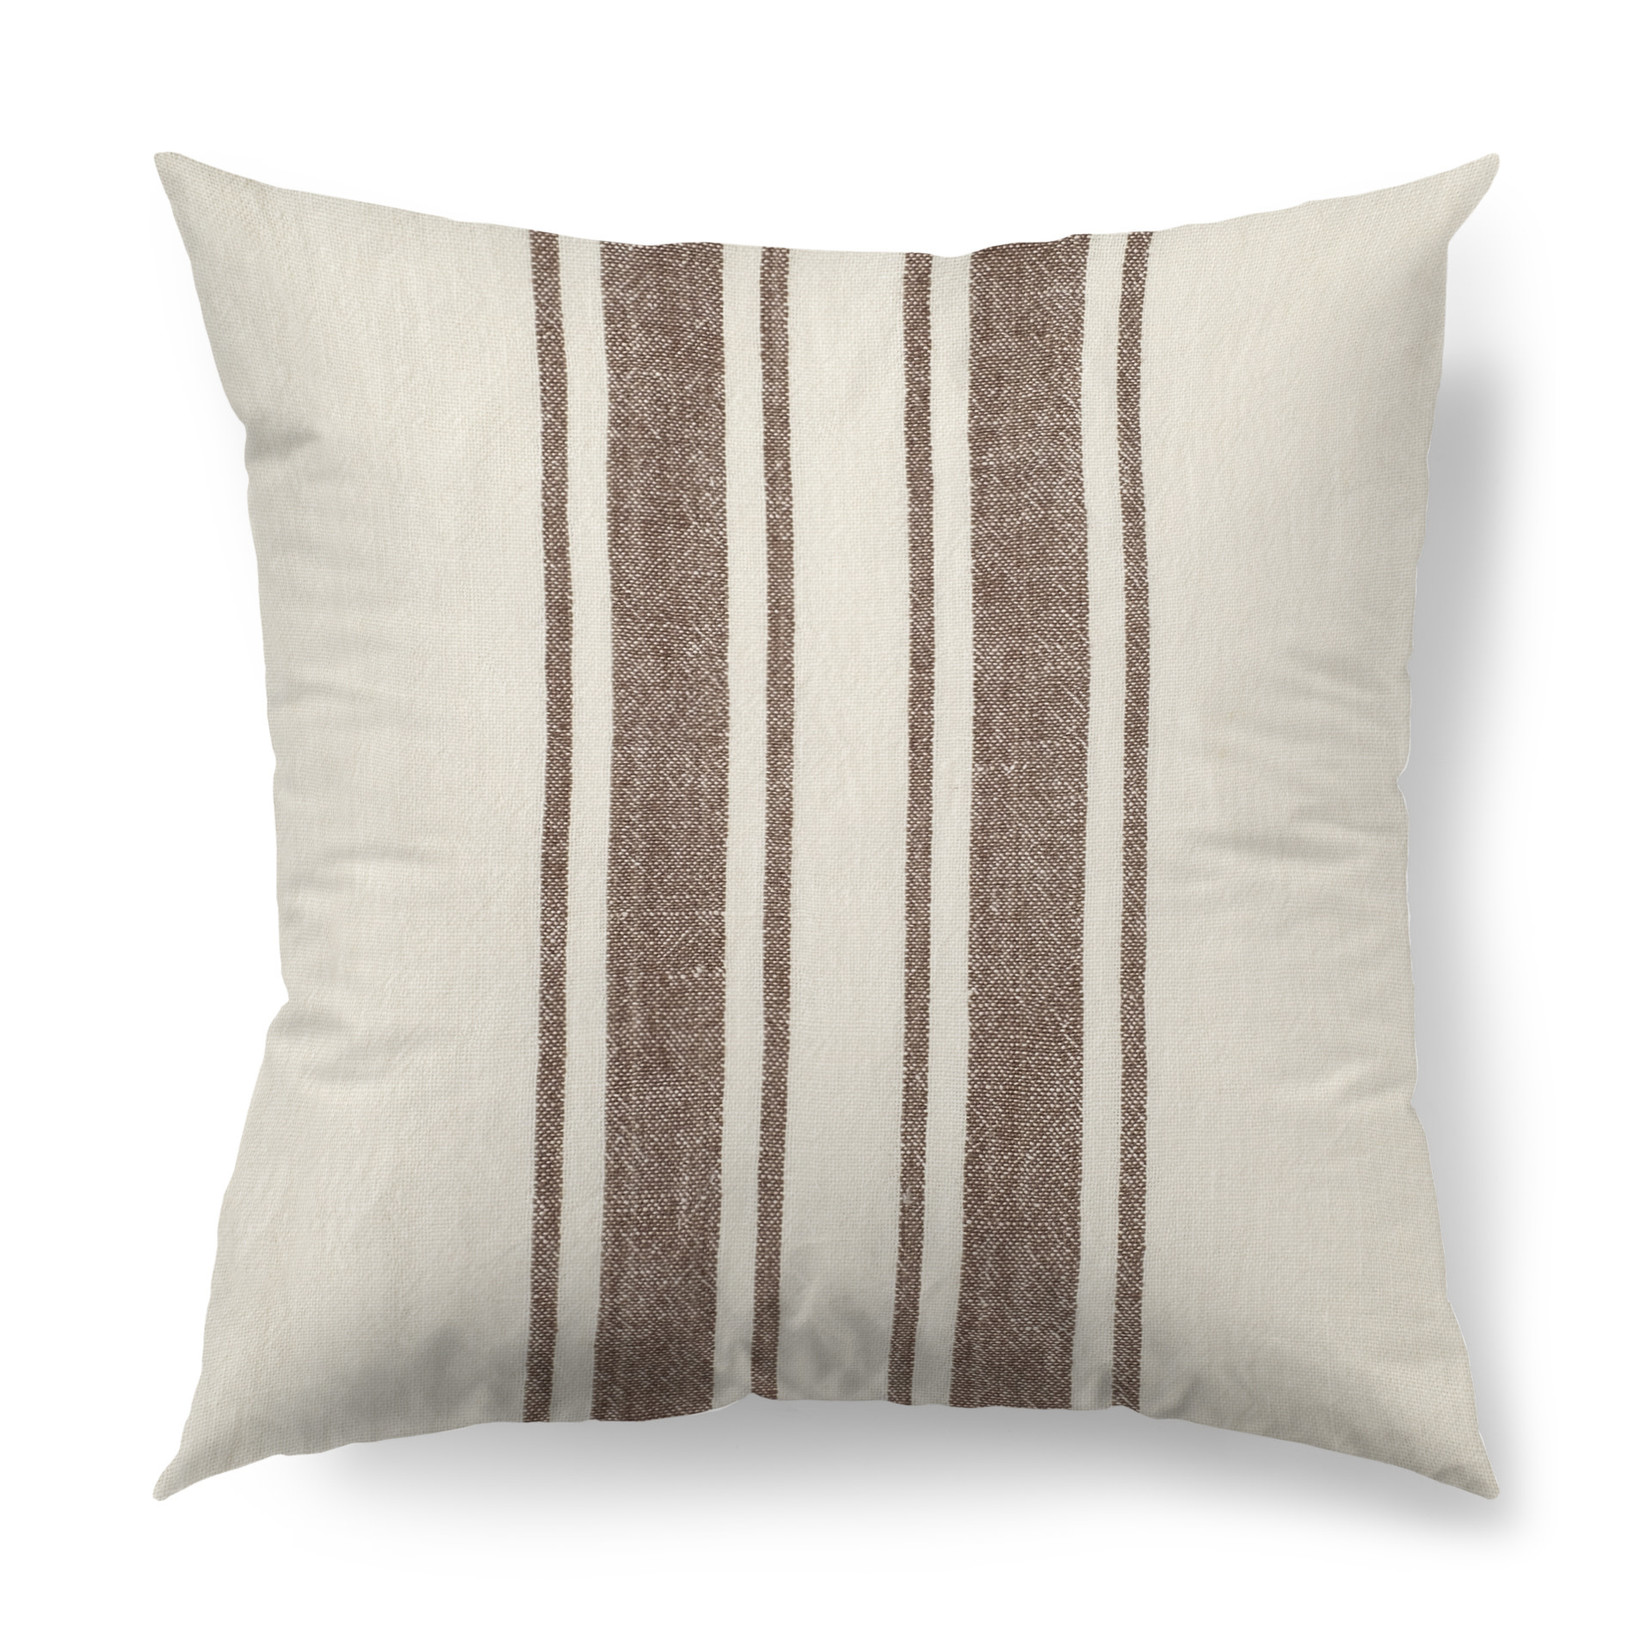 Phebe 22x22 Pillow Cover